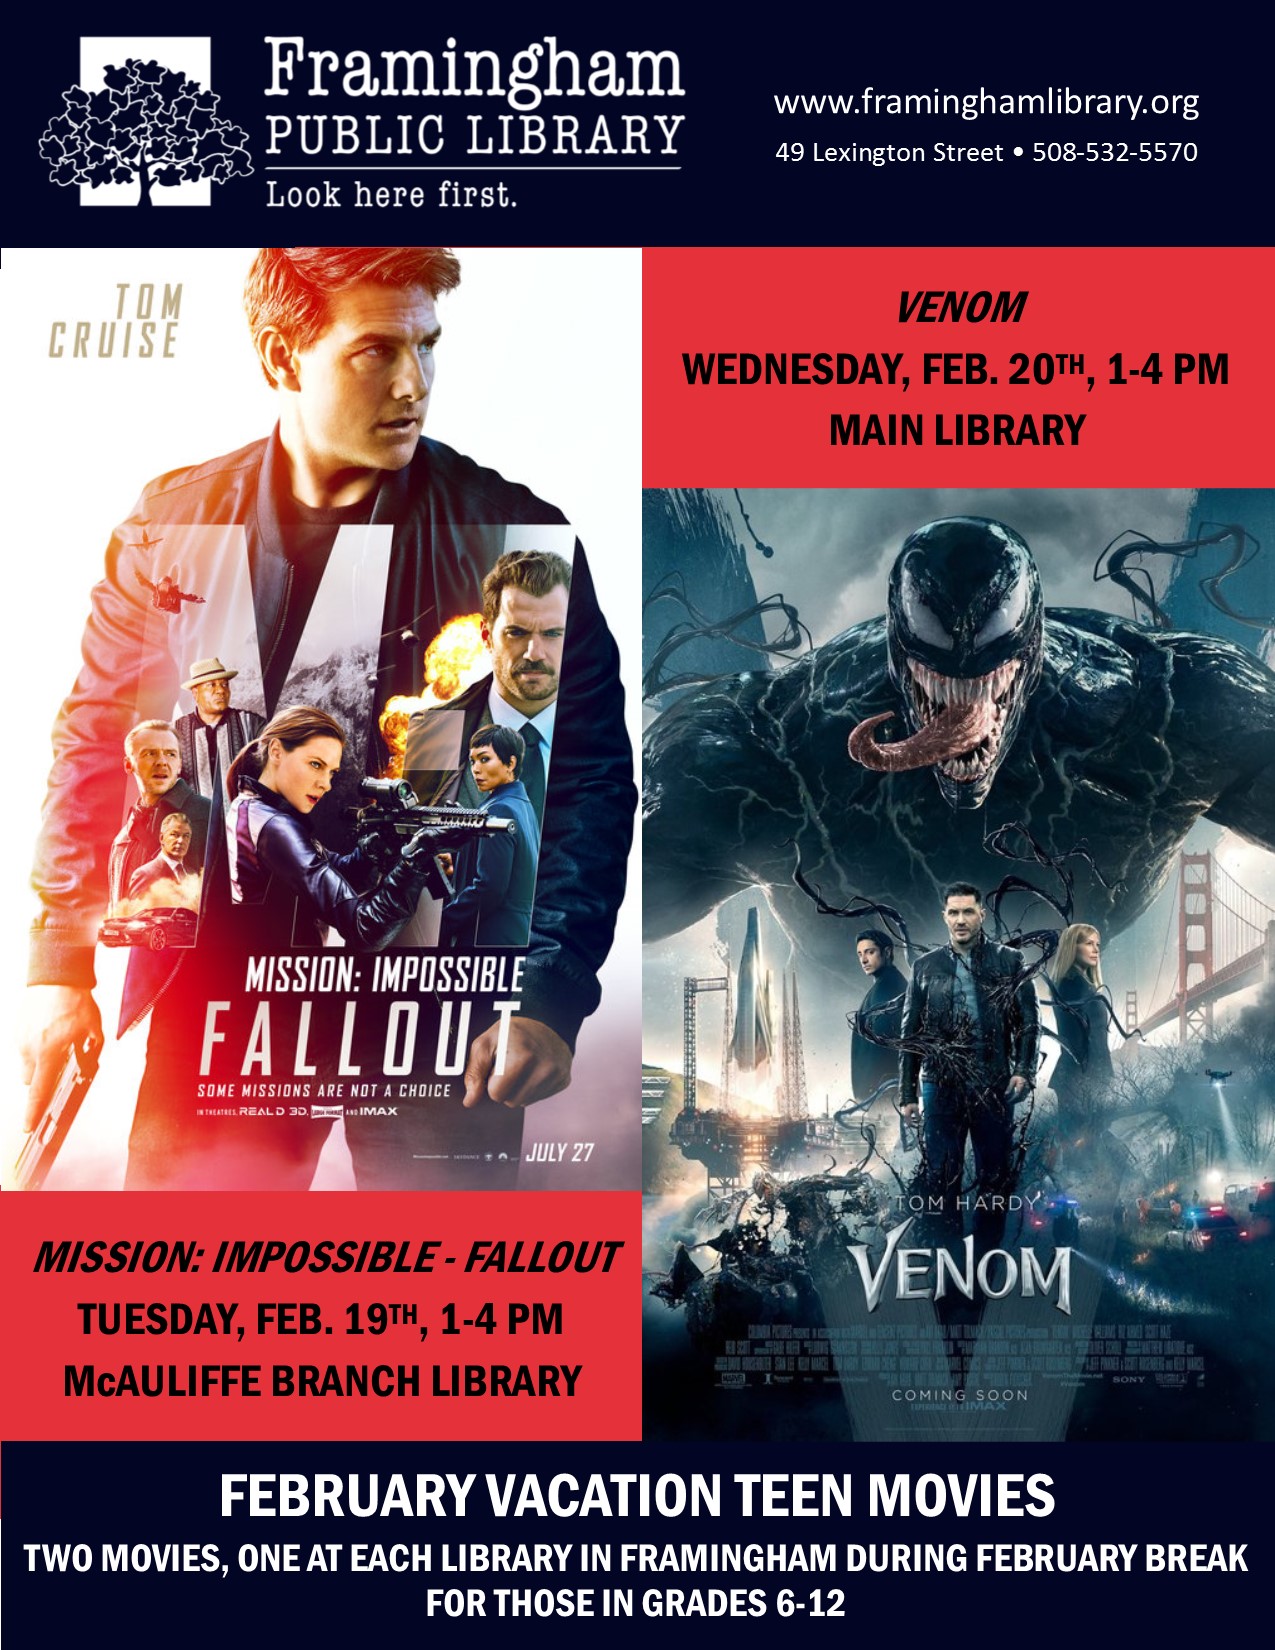 February Break Teen Movie at the McAuliffe Branch - Mission: Impossible Fallout thumbnail Photo